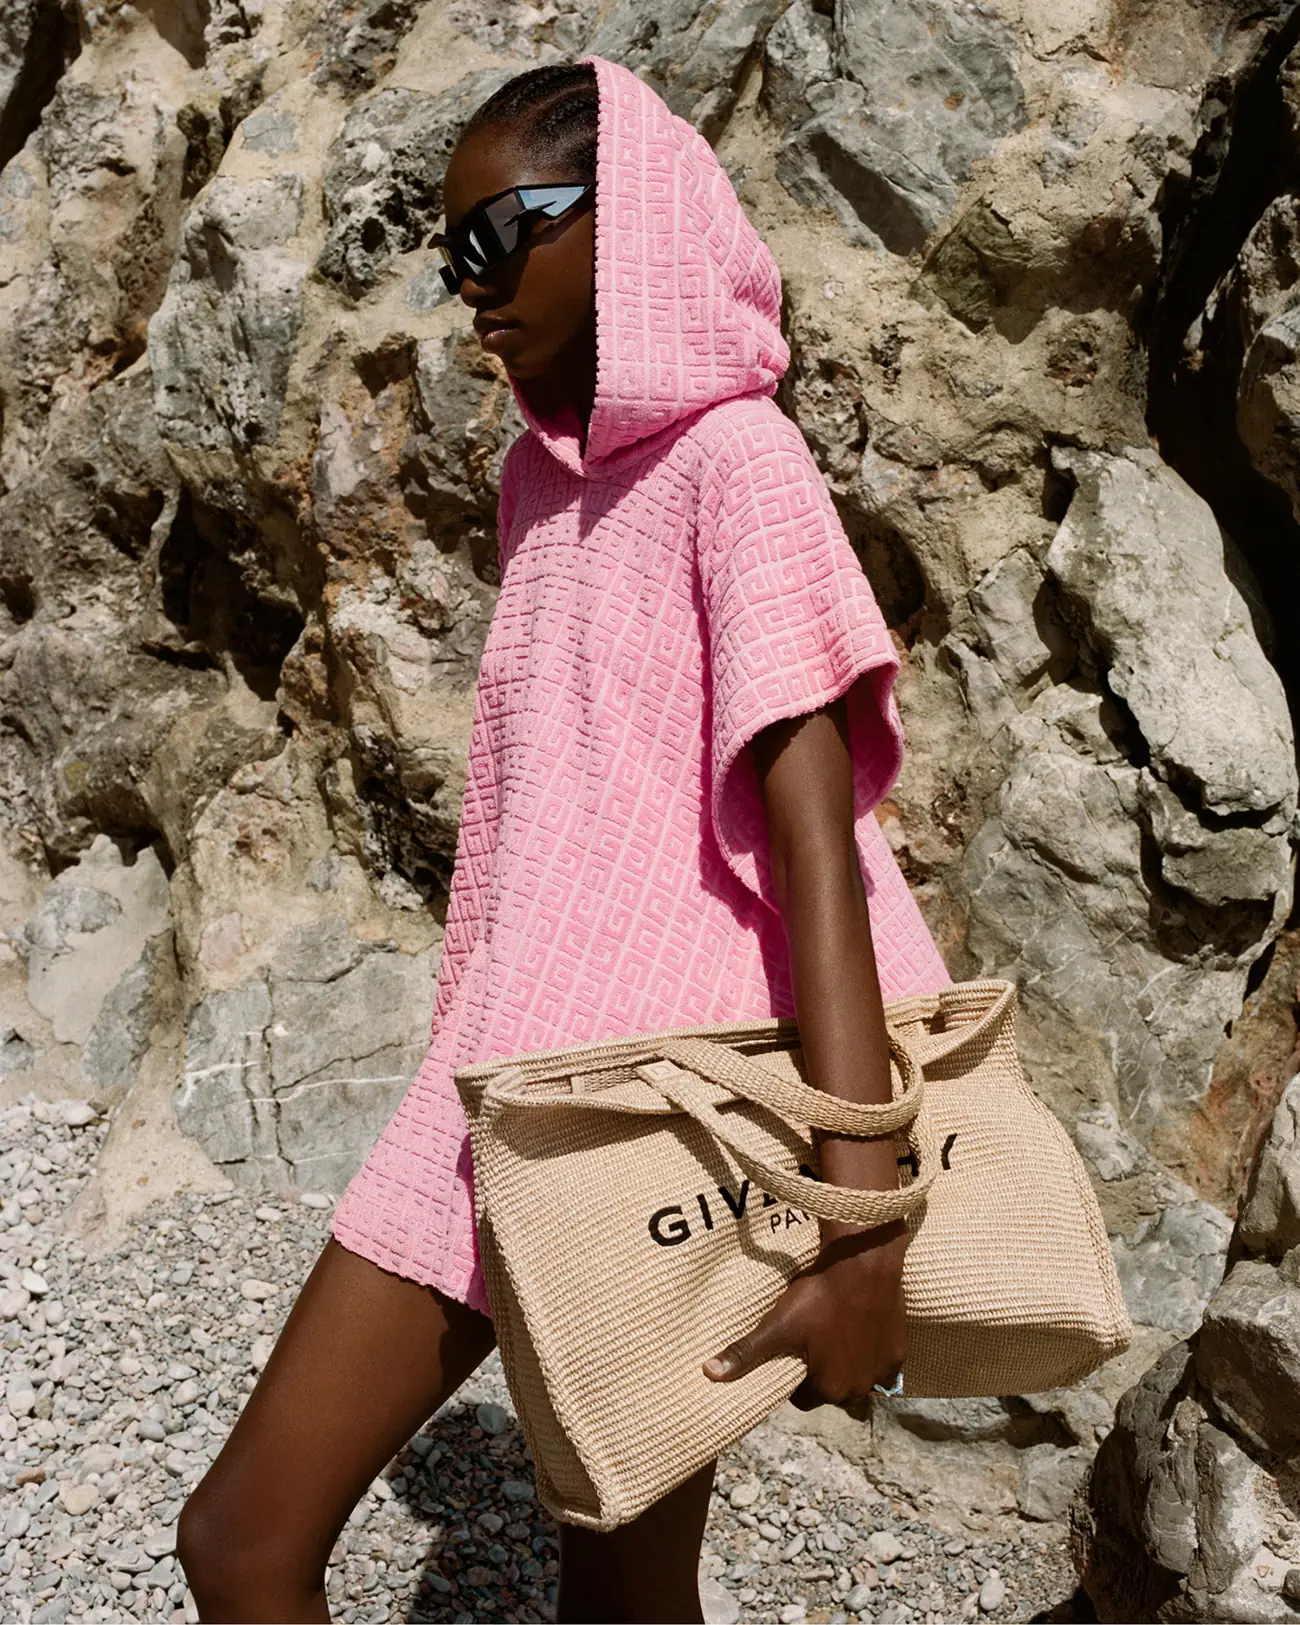 Givenchy Plage: A chic Summer ensemble